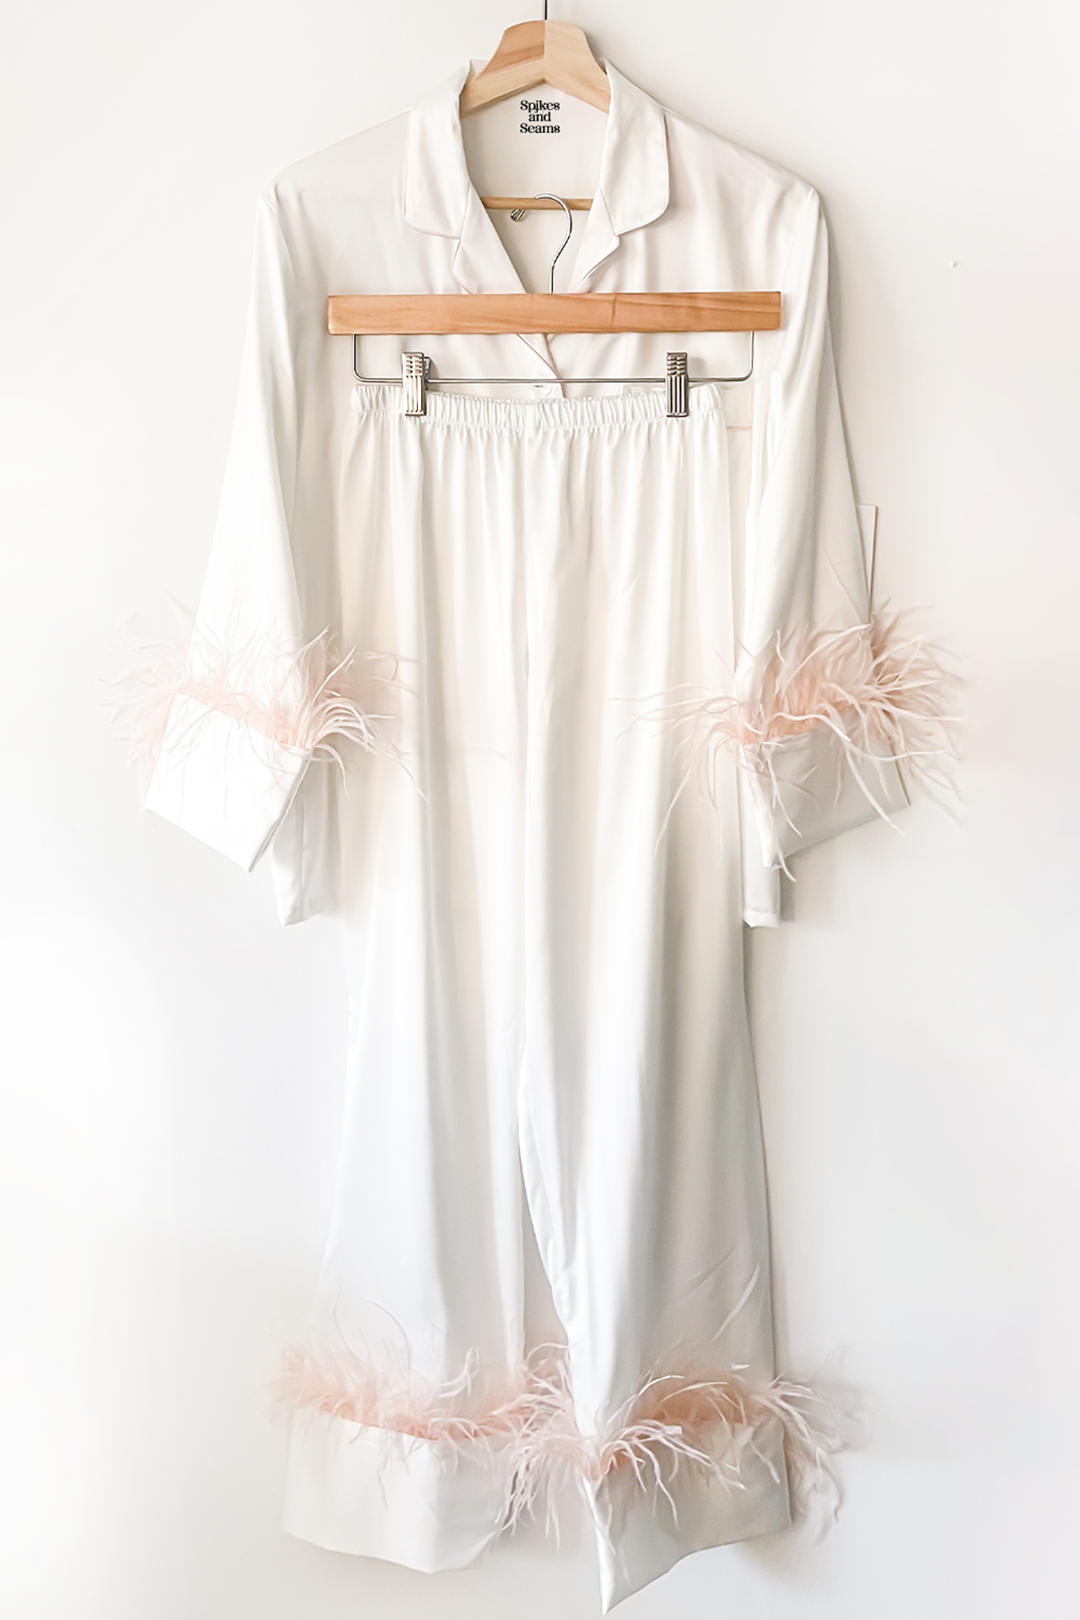 White with Blush Ostrich Feathers Pajama Pants Set